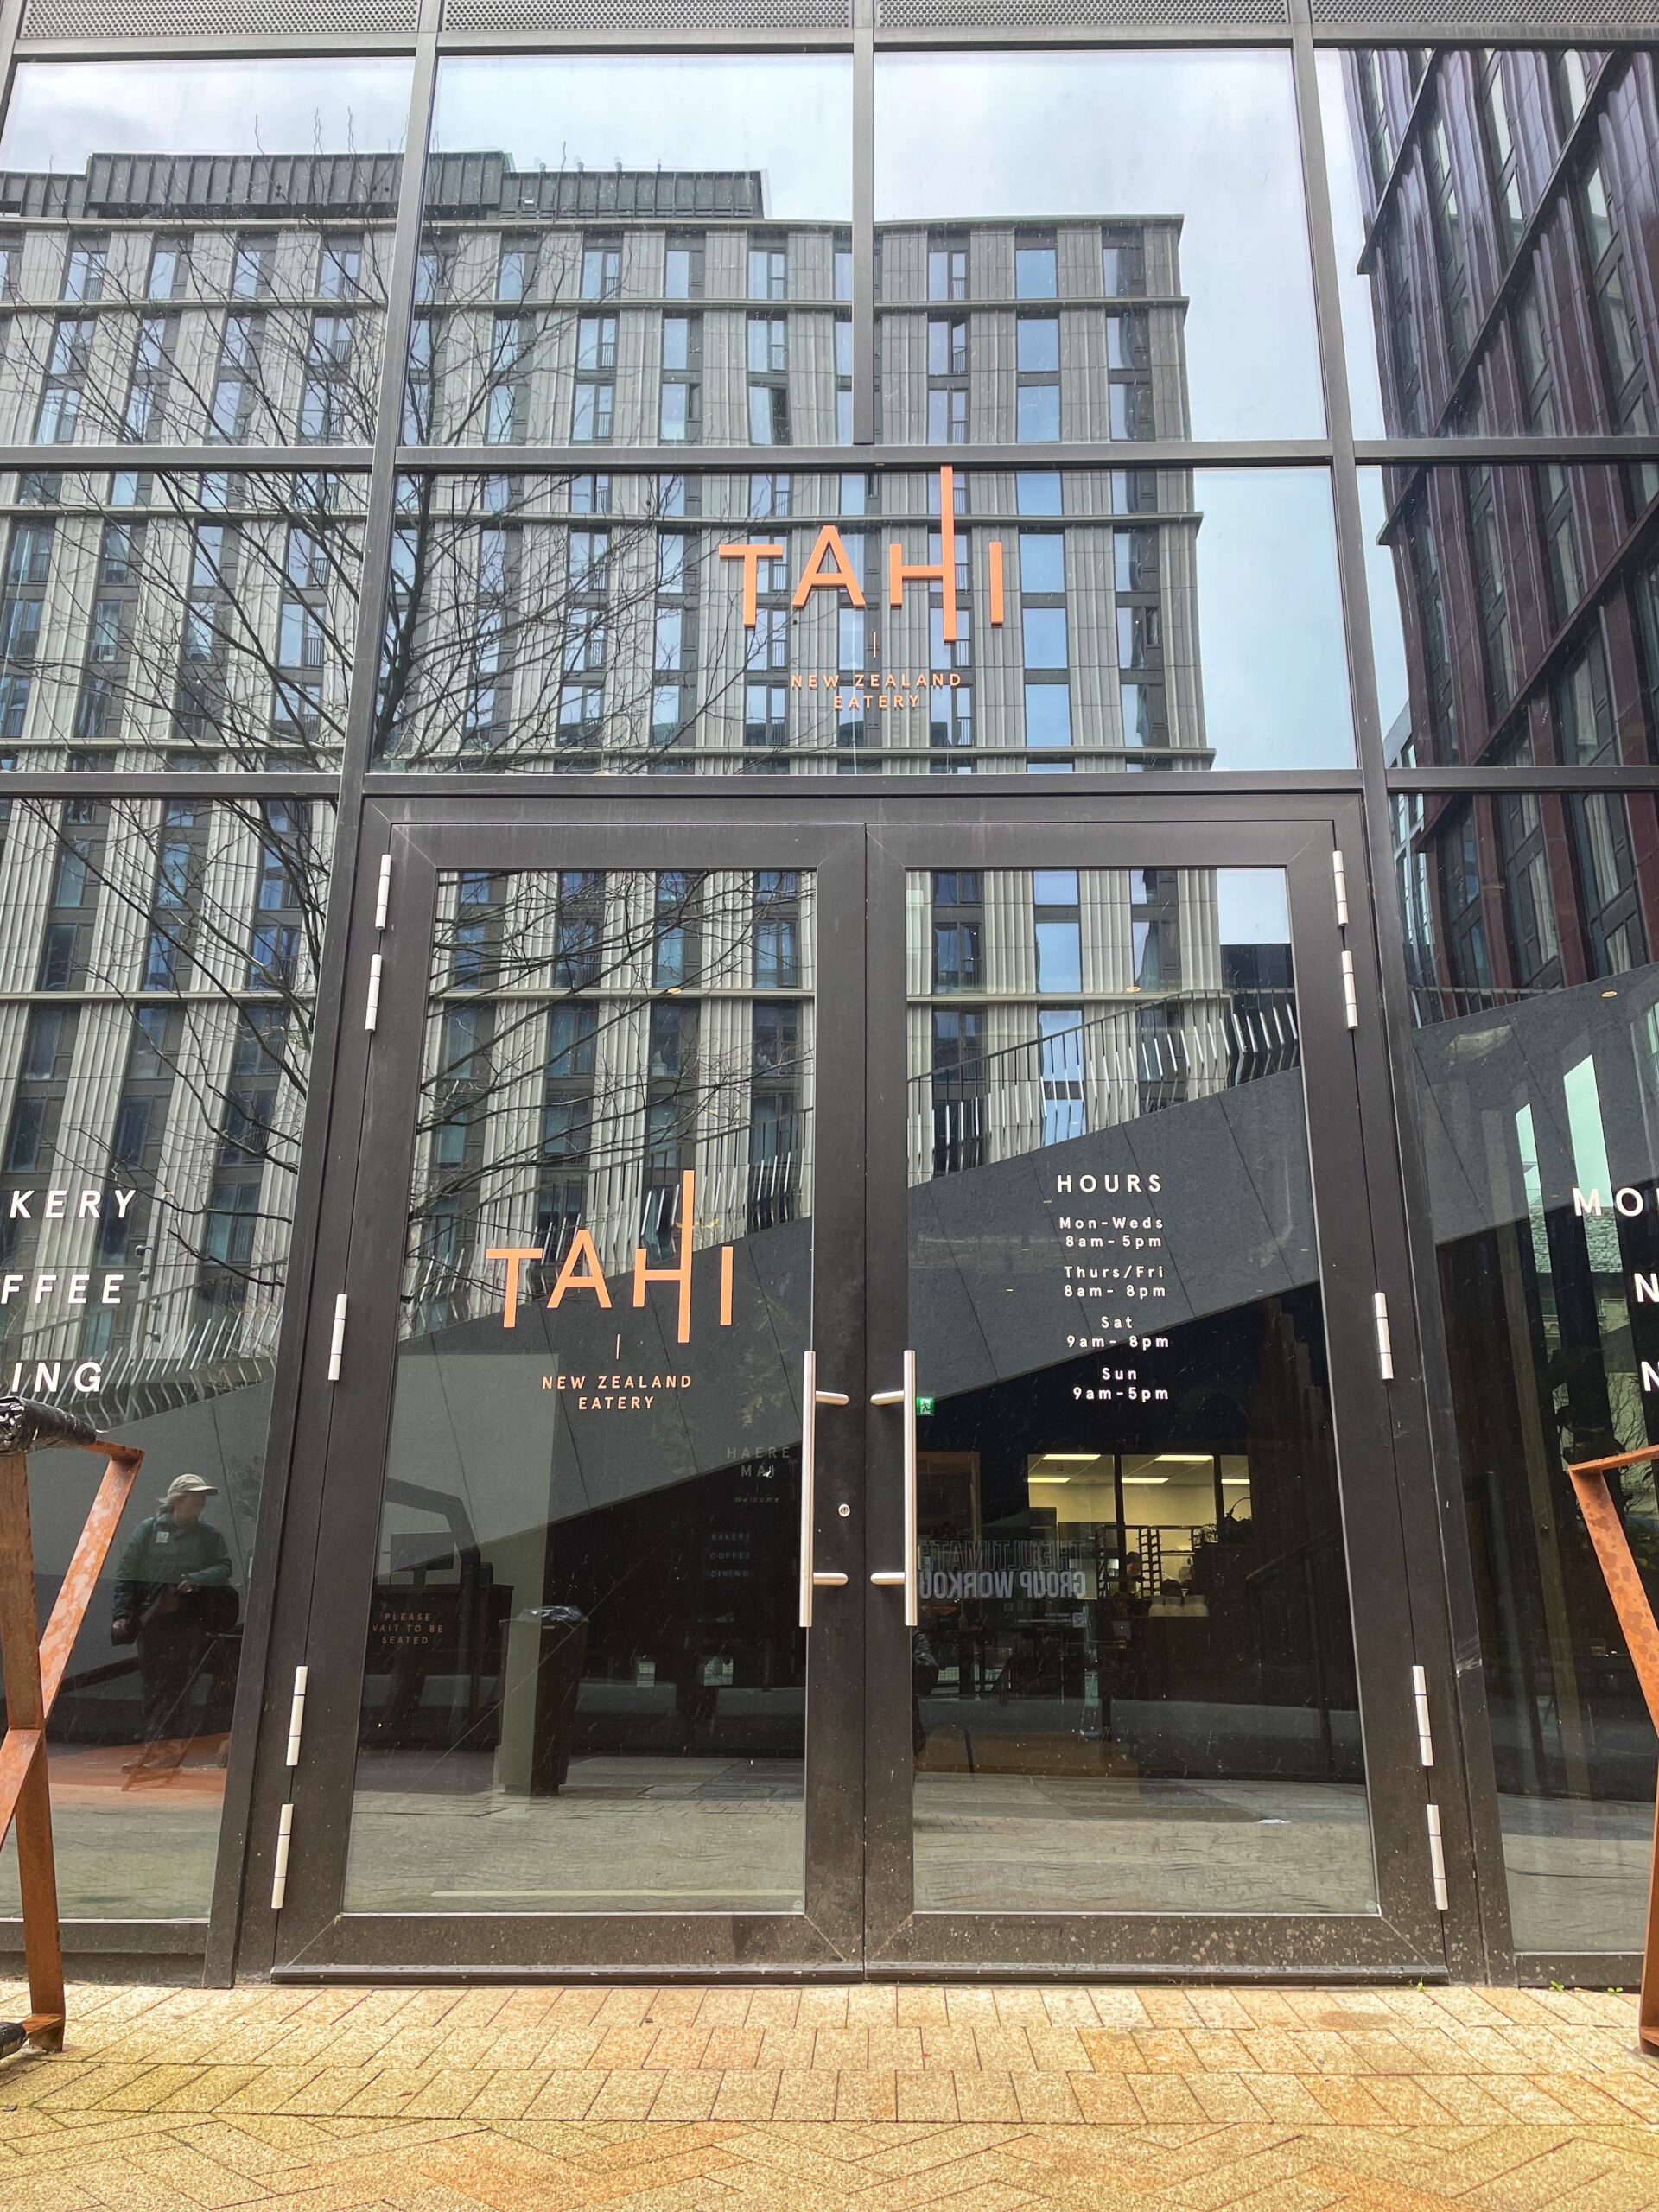 Tahi in Manchester has announced its closure. Credit: The Manc Group